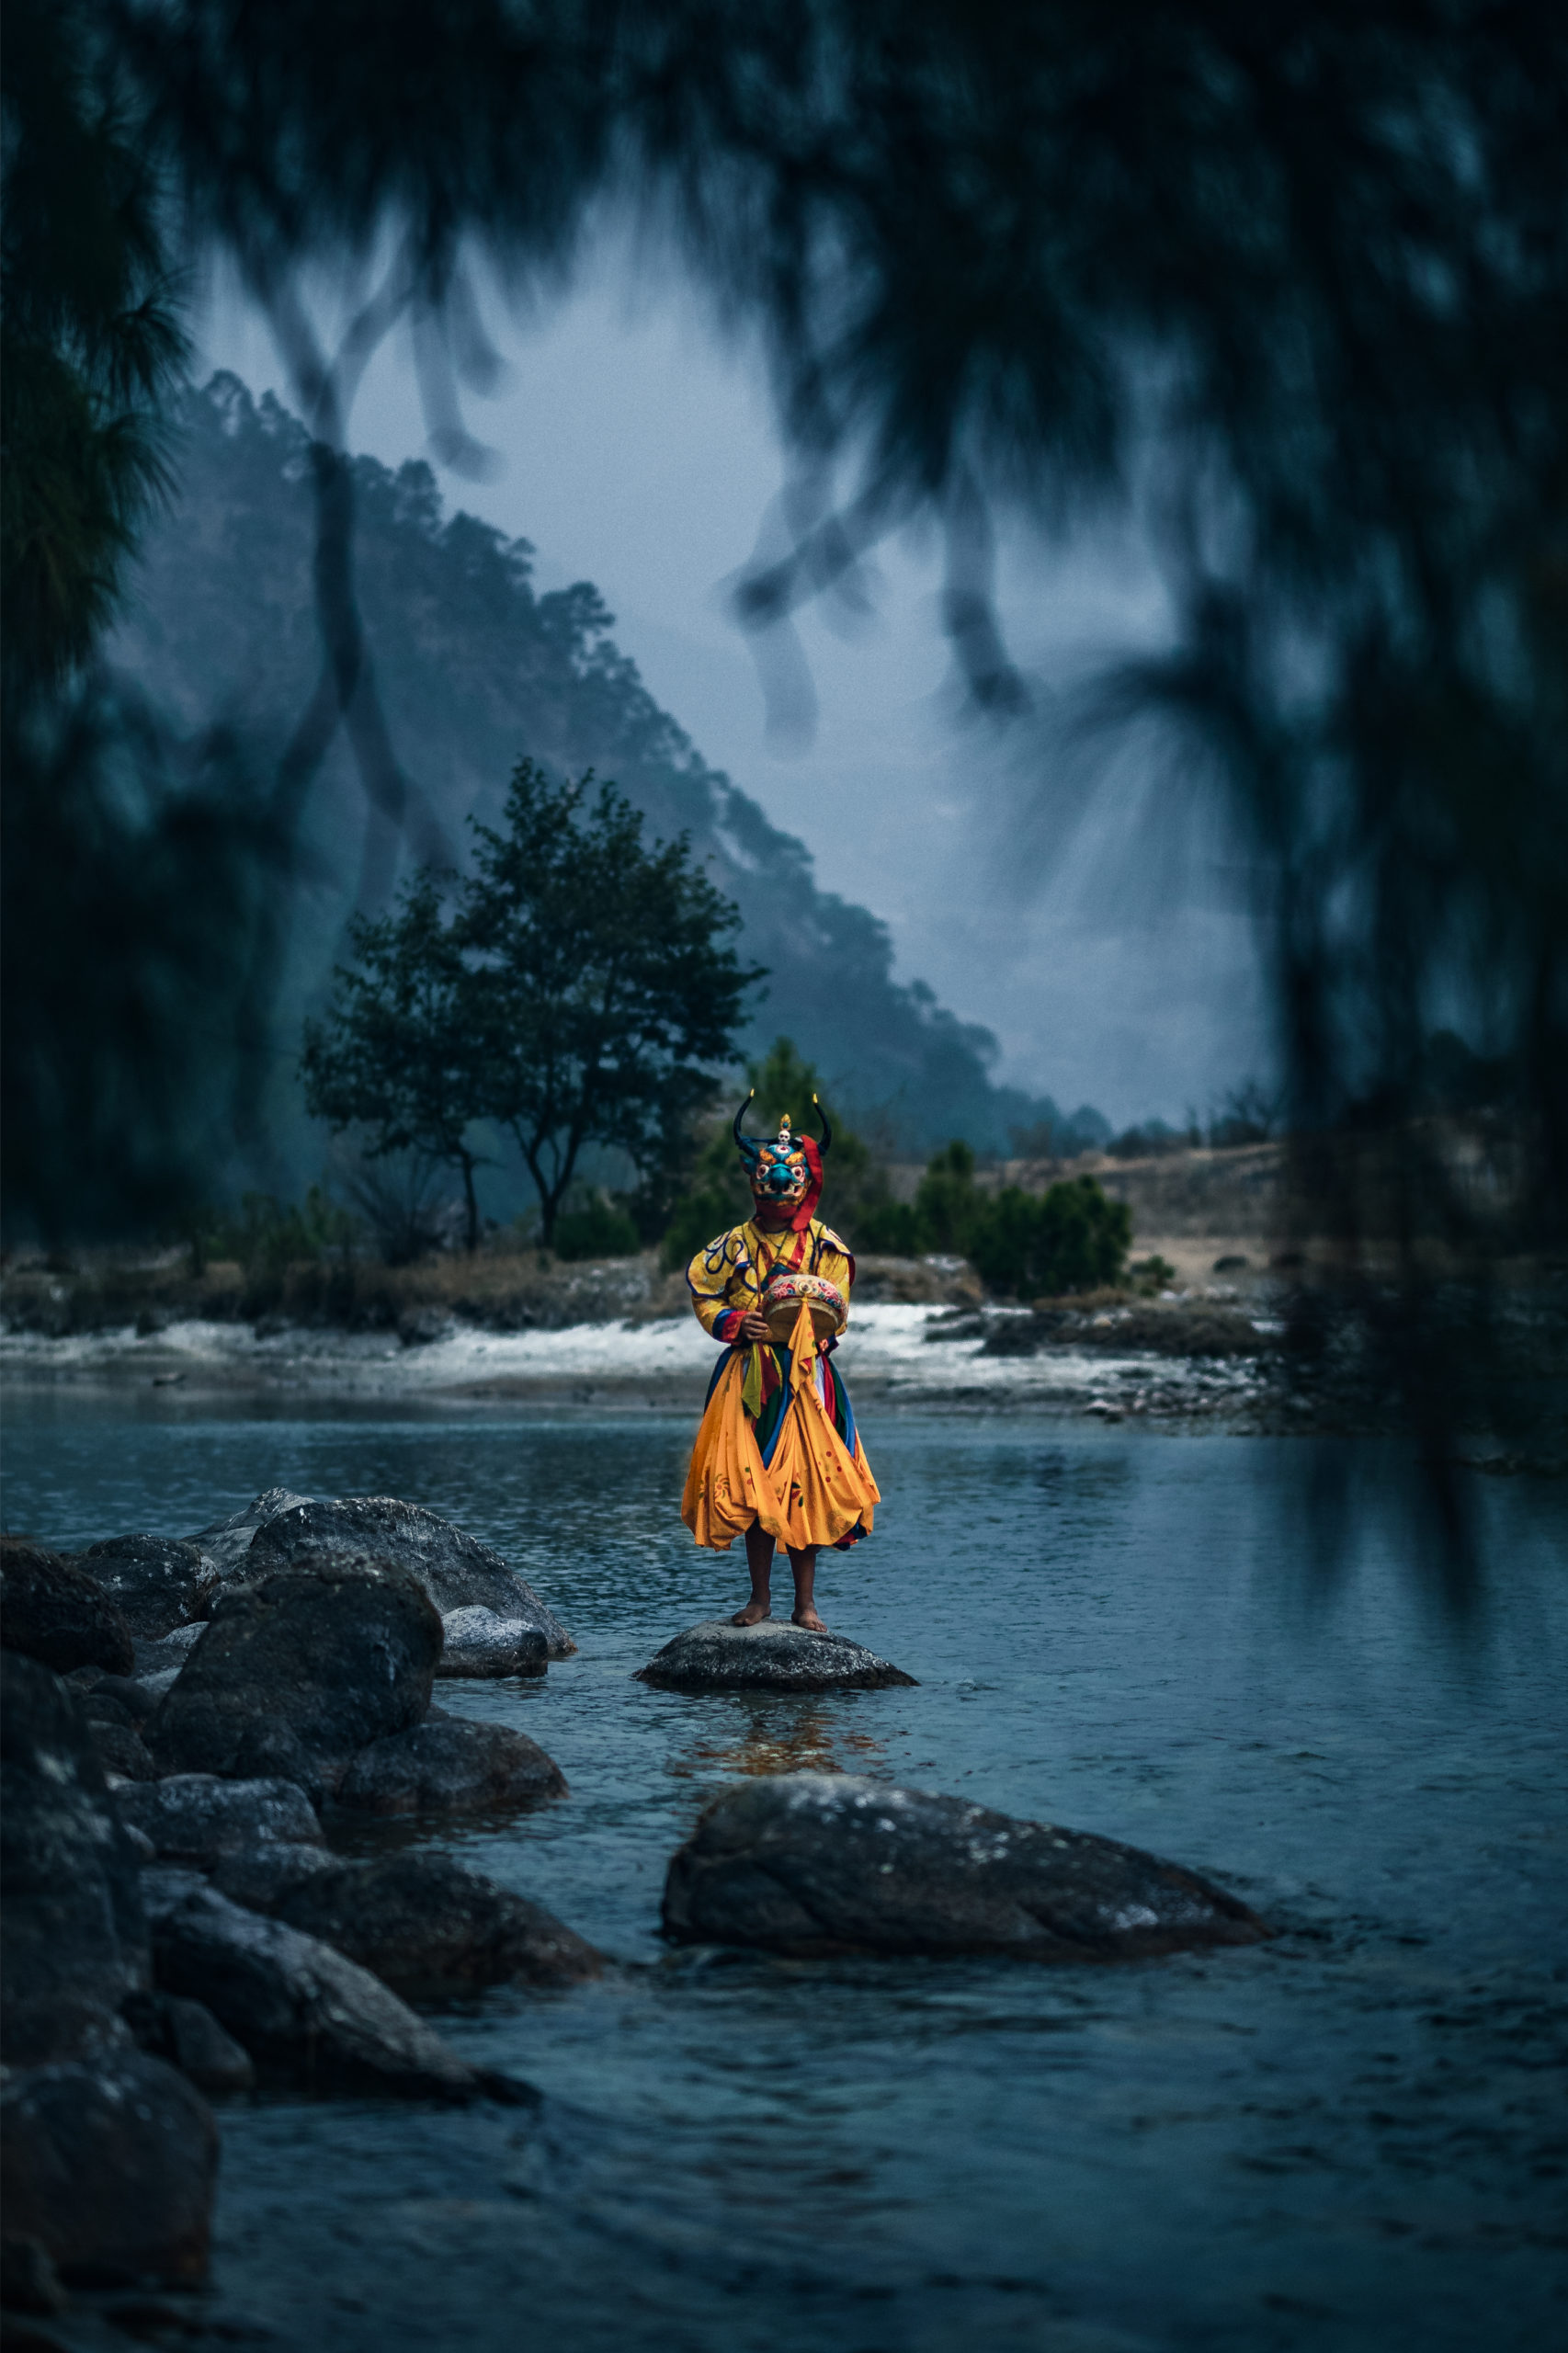 Photography of Bhutan's traditional masked dancers in Punakha